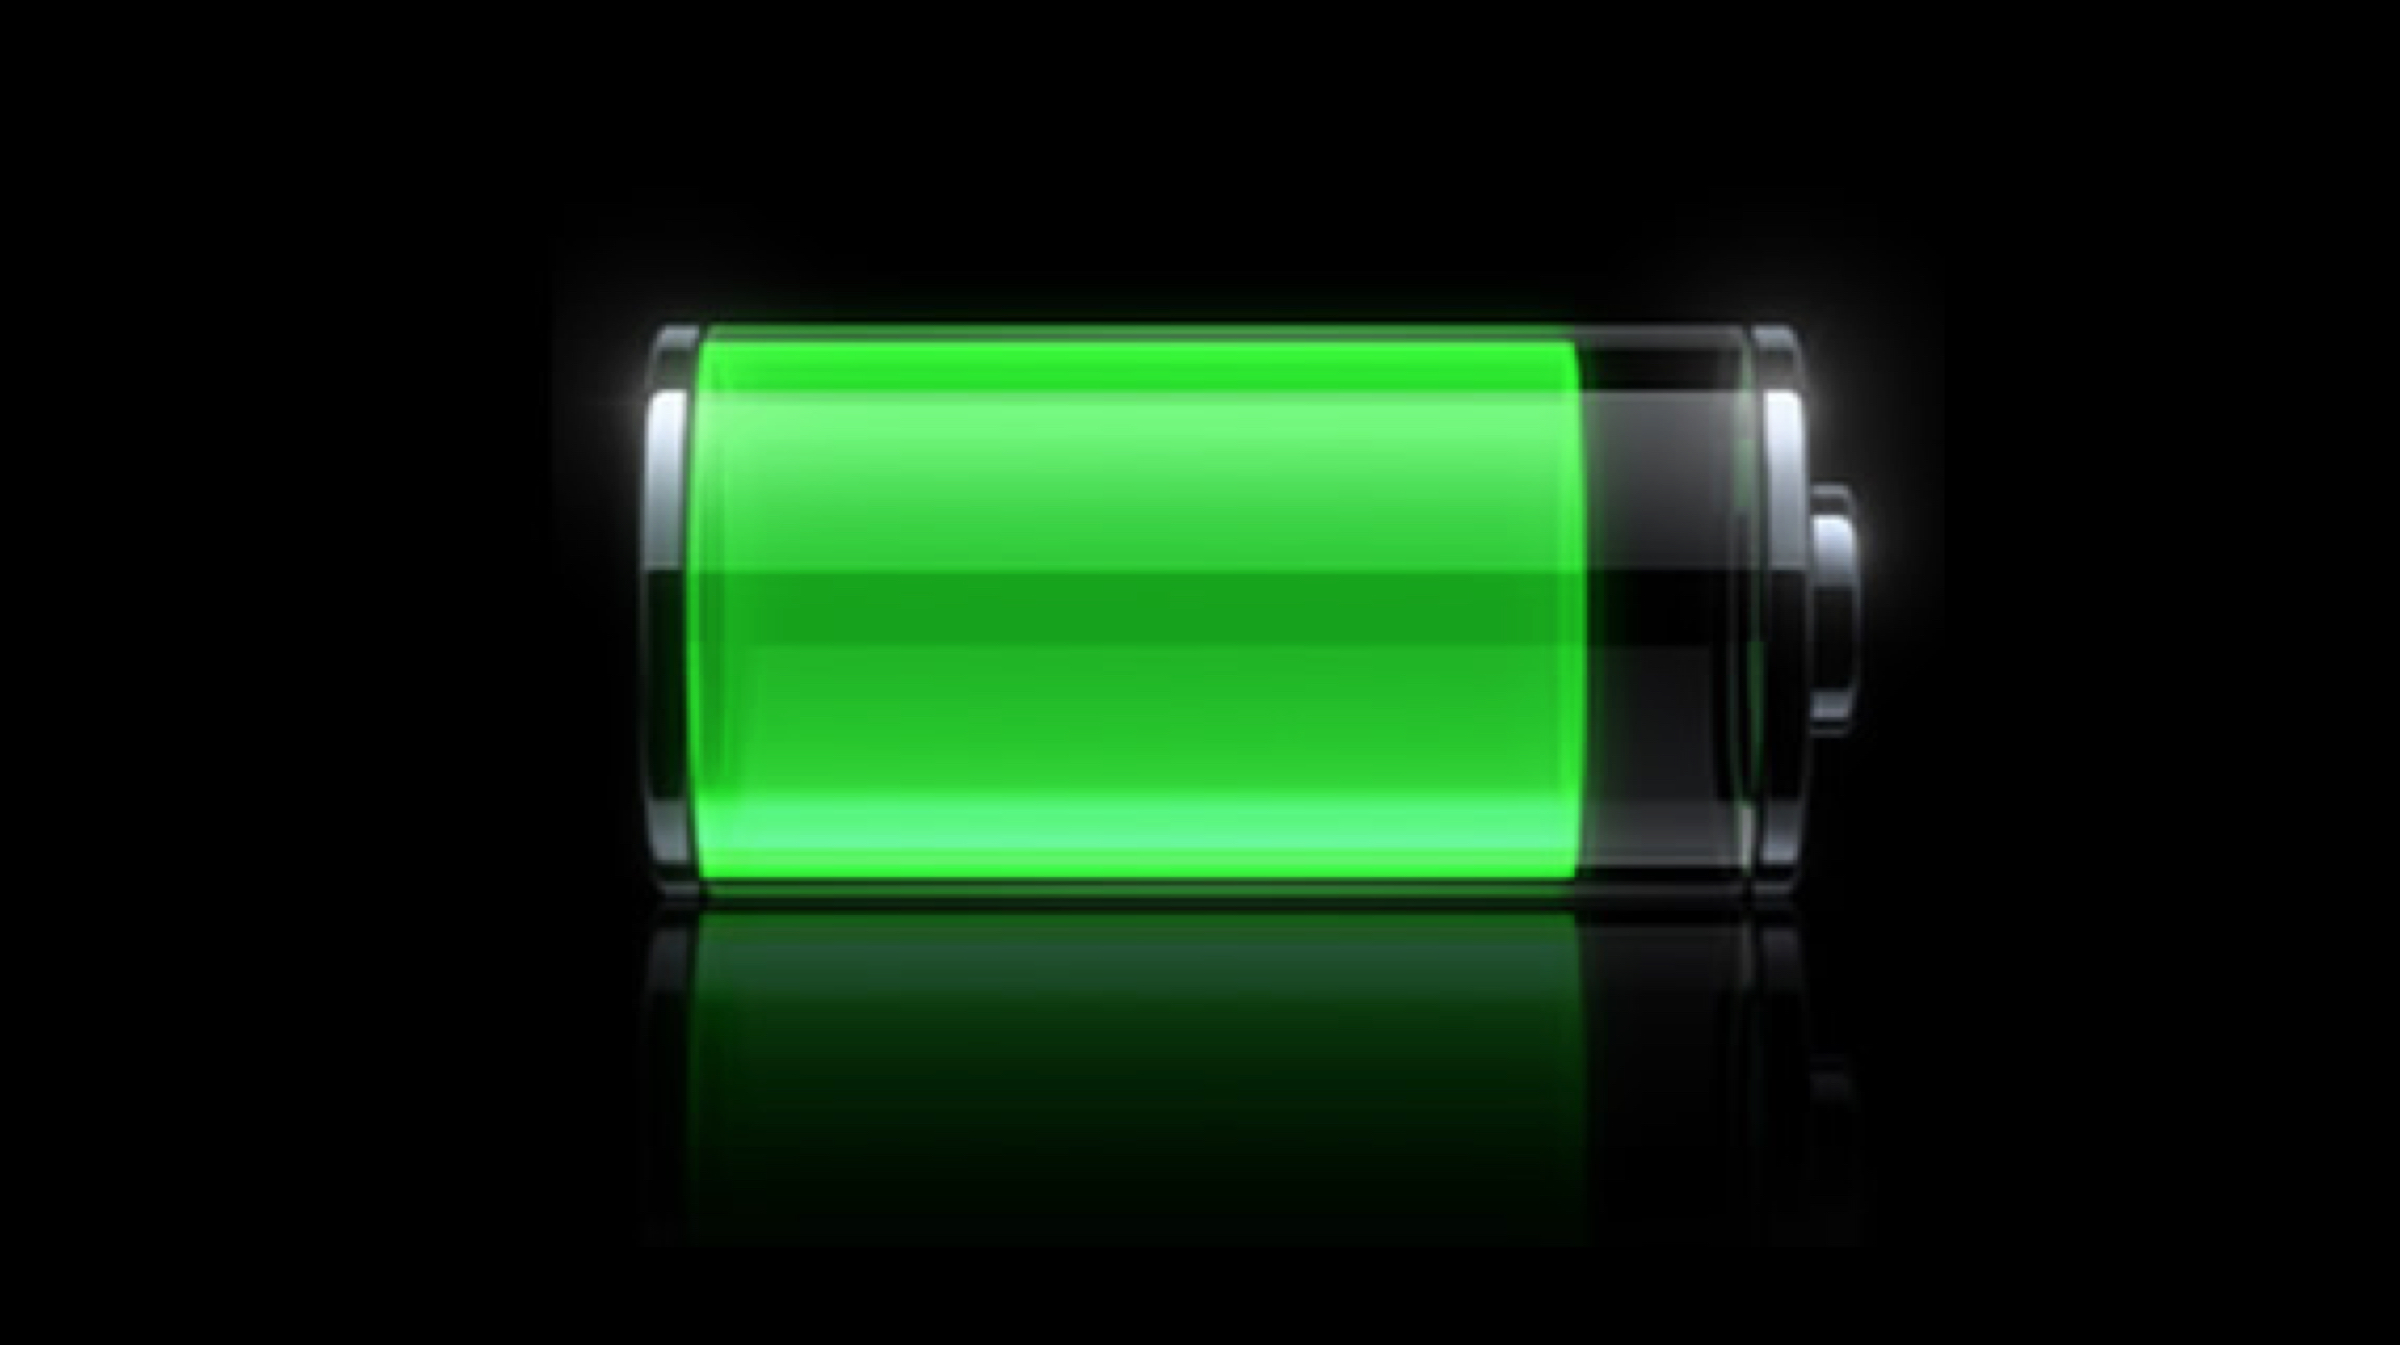  A green battery icon with a black background represents the search query "iPhone stiker WhatsApp pihak ketiga".